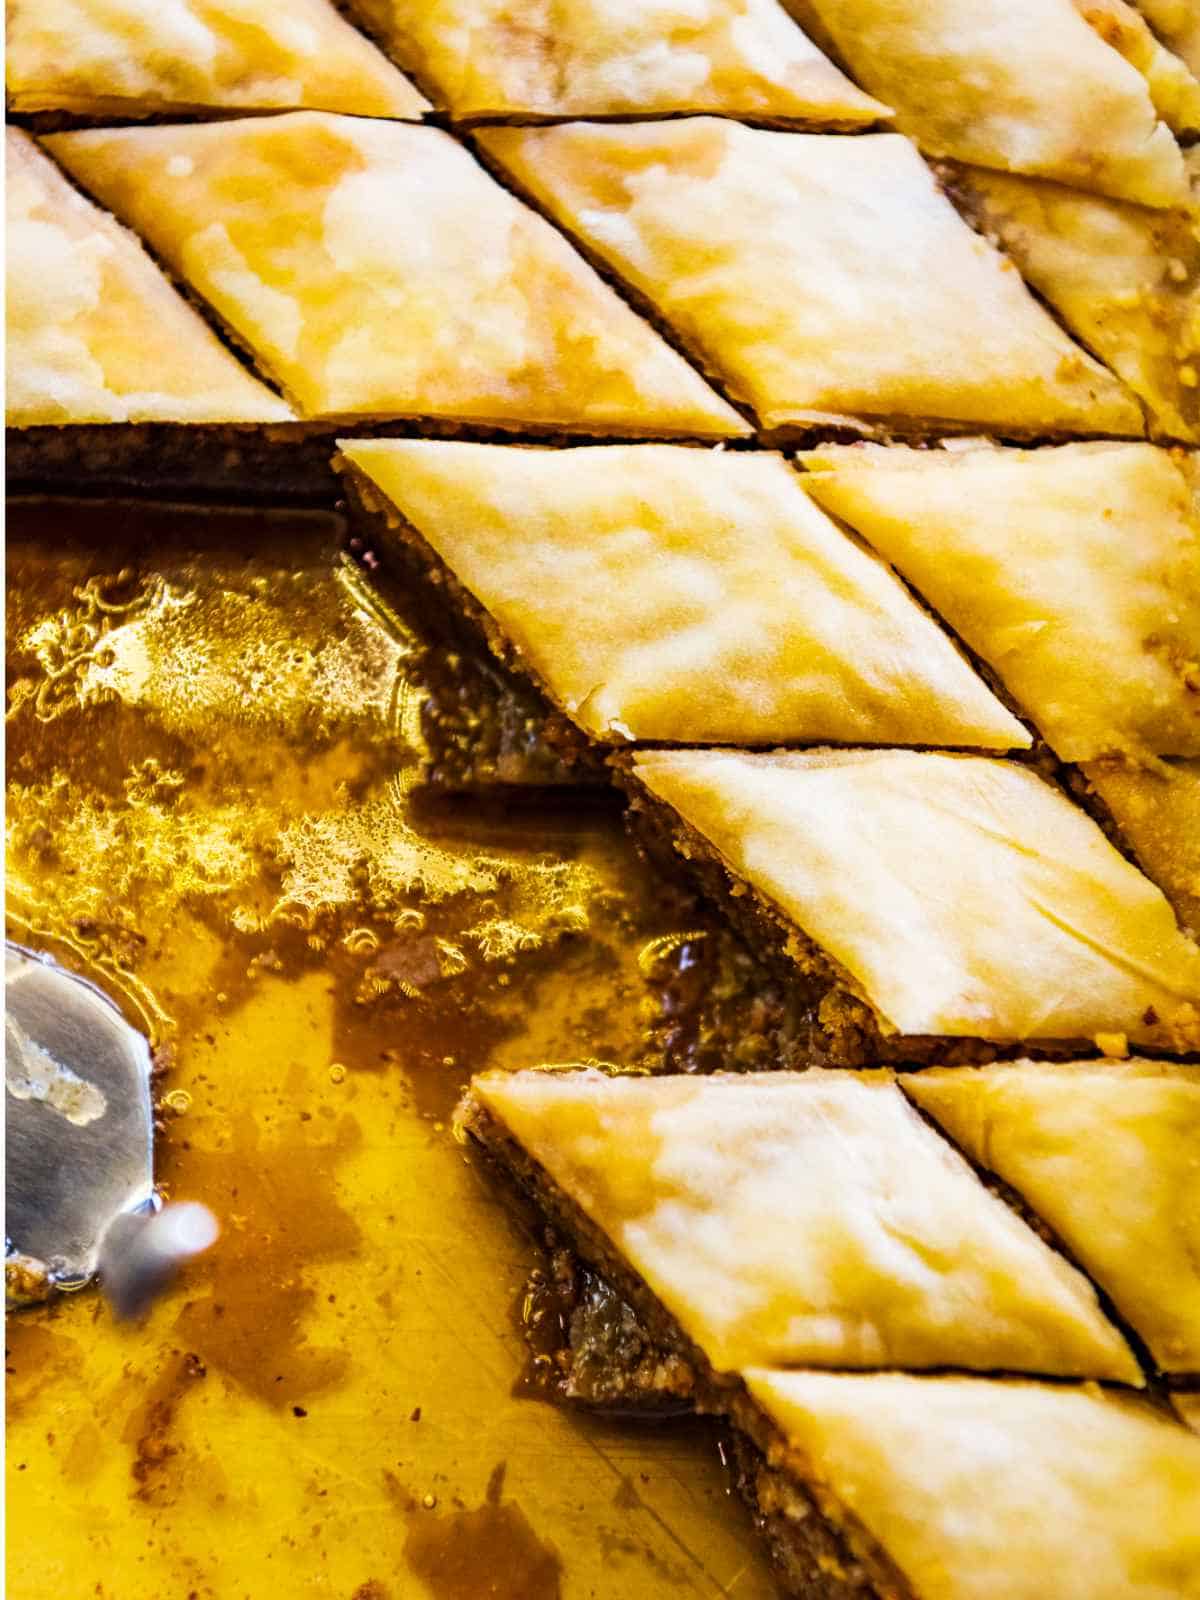 Baklava is a layered filo pastry dough filled with nuts, and honey. It's a popular Easter treat in many Middle Eastern and East European countries.